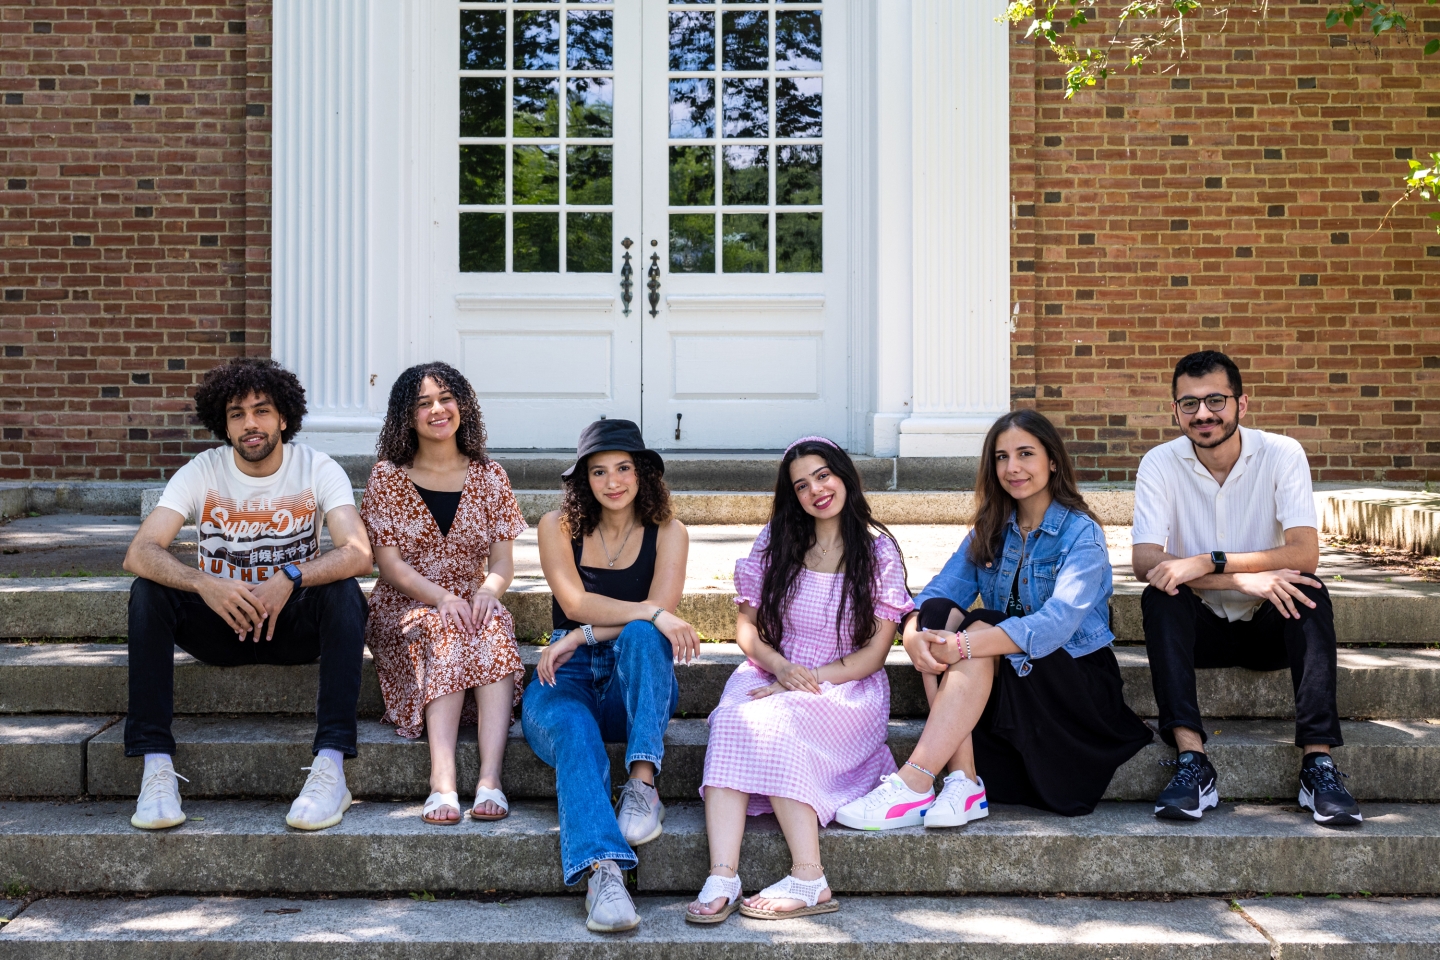 Students from AUK visit Dartmouth's campus.